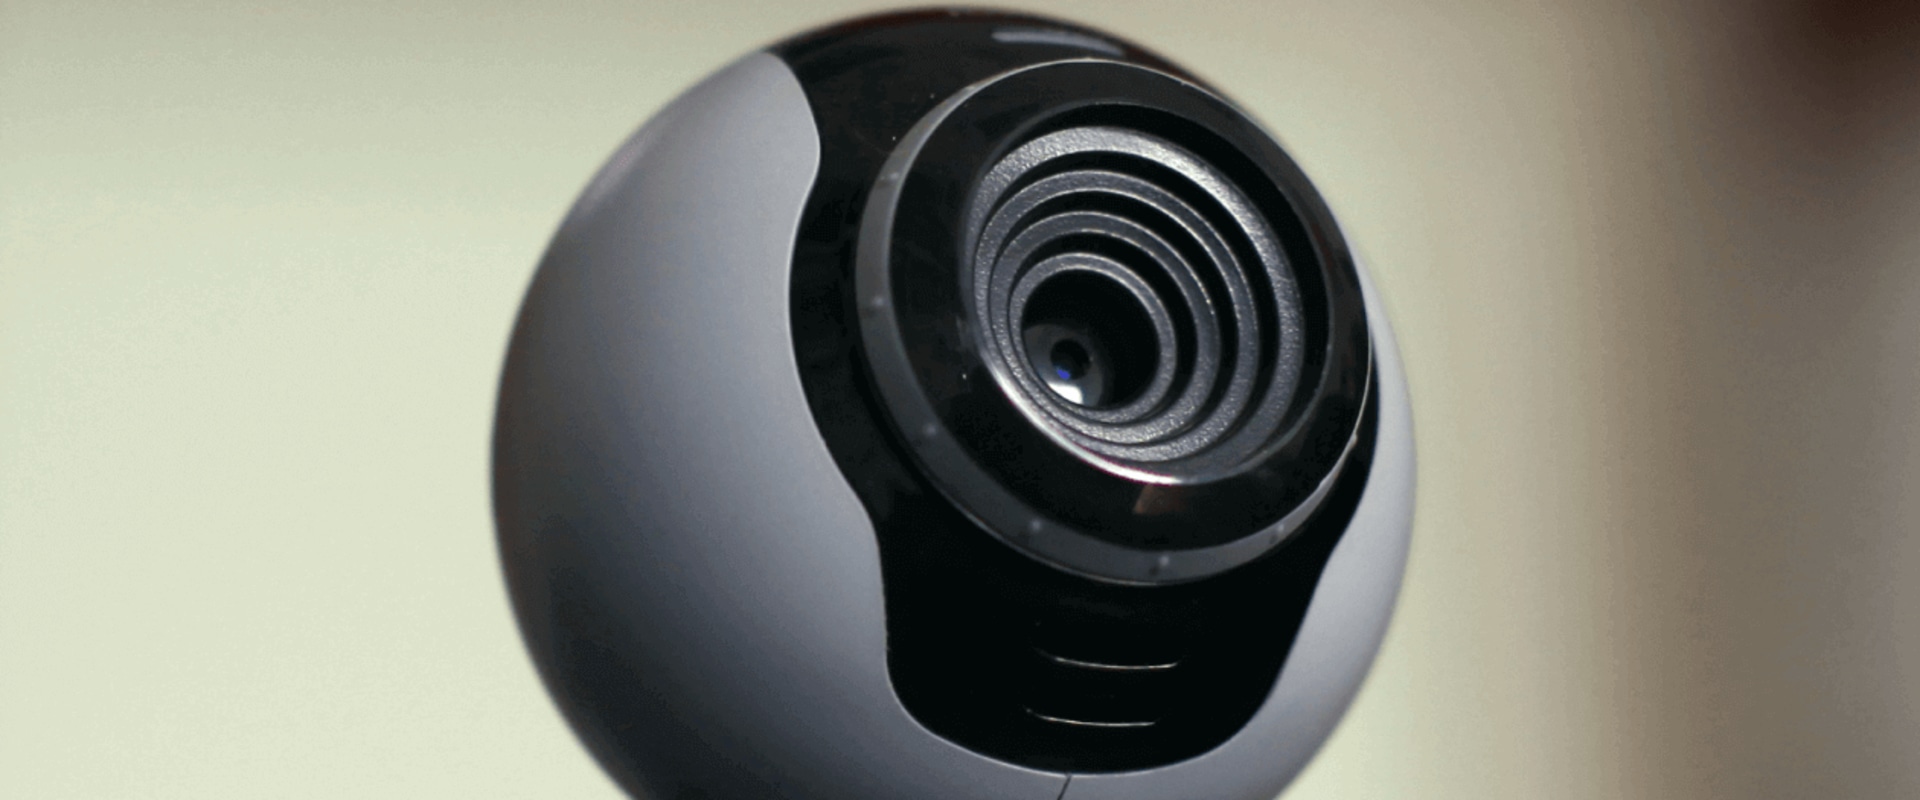 Understanding Autofocus and Low-Light Performance for Streaming Webcams